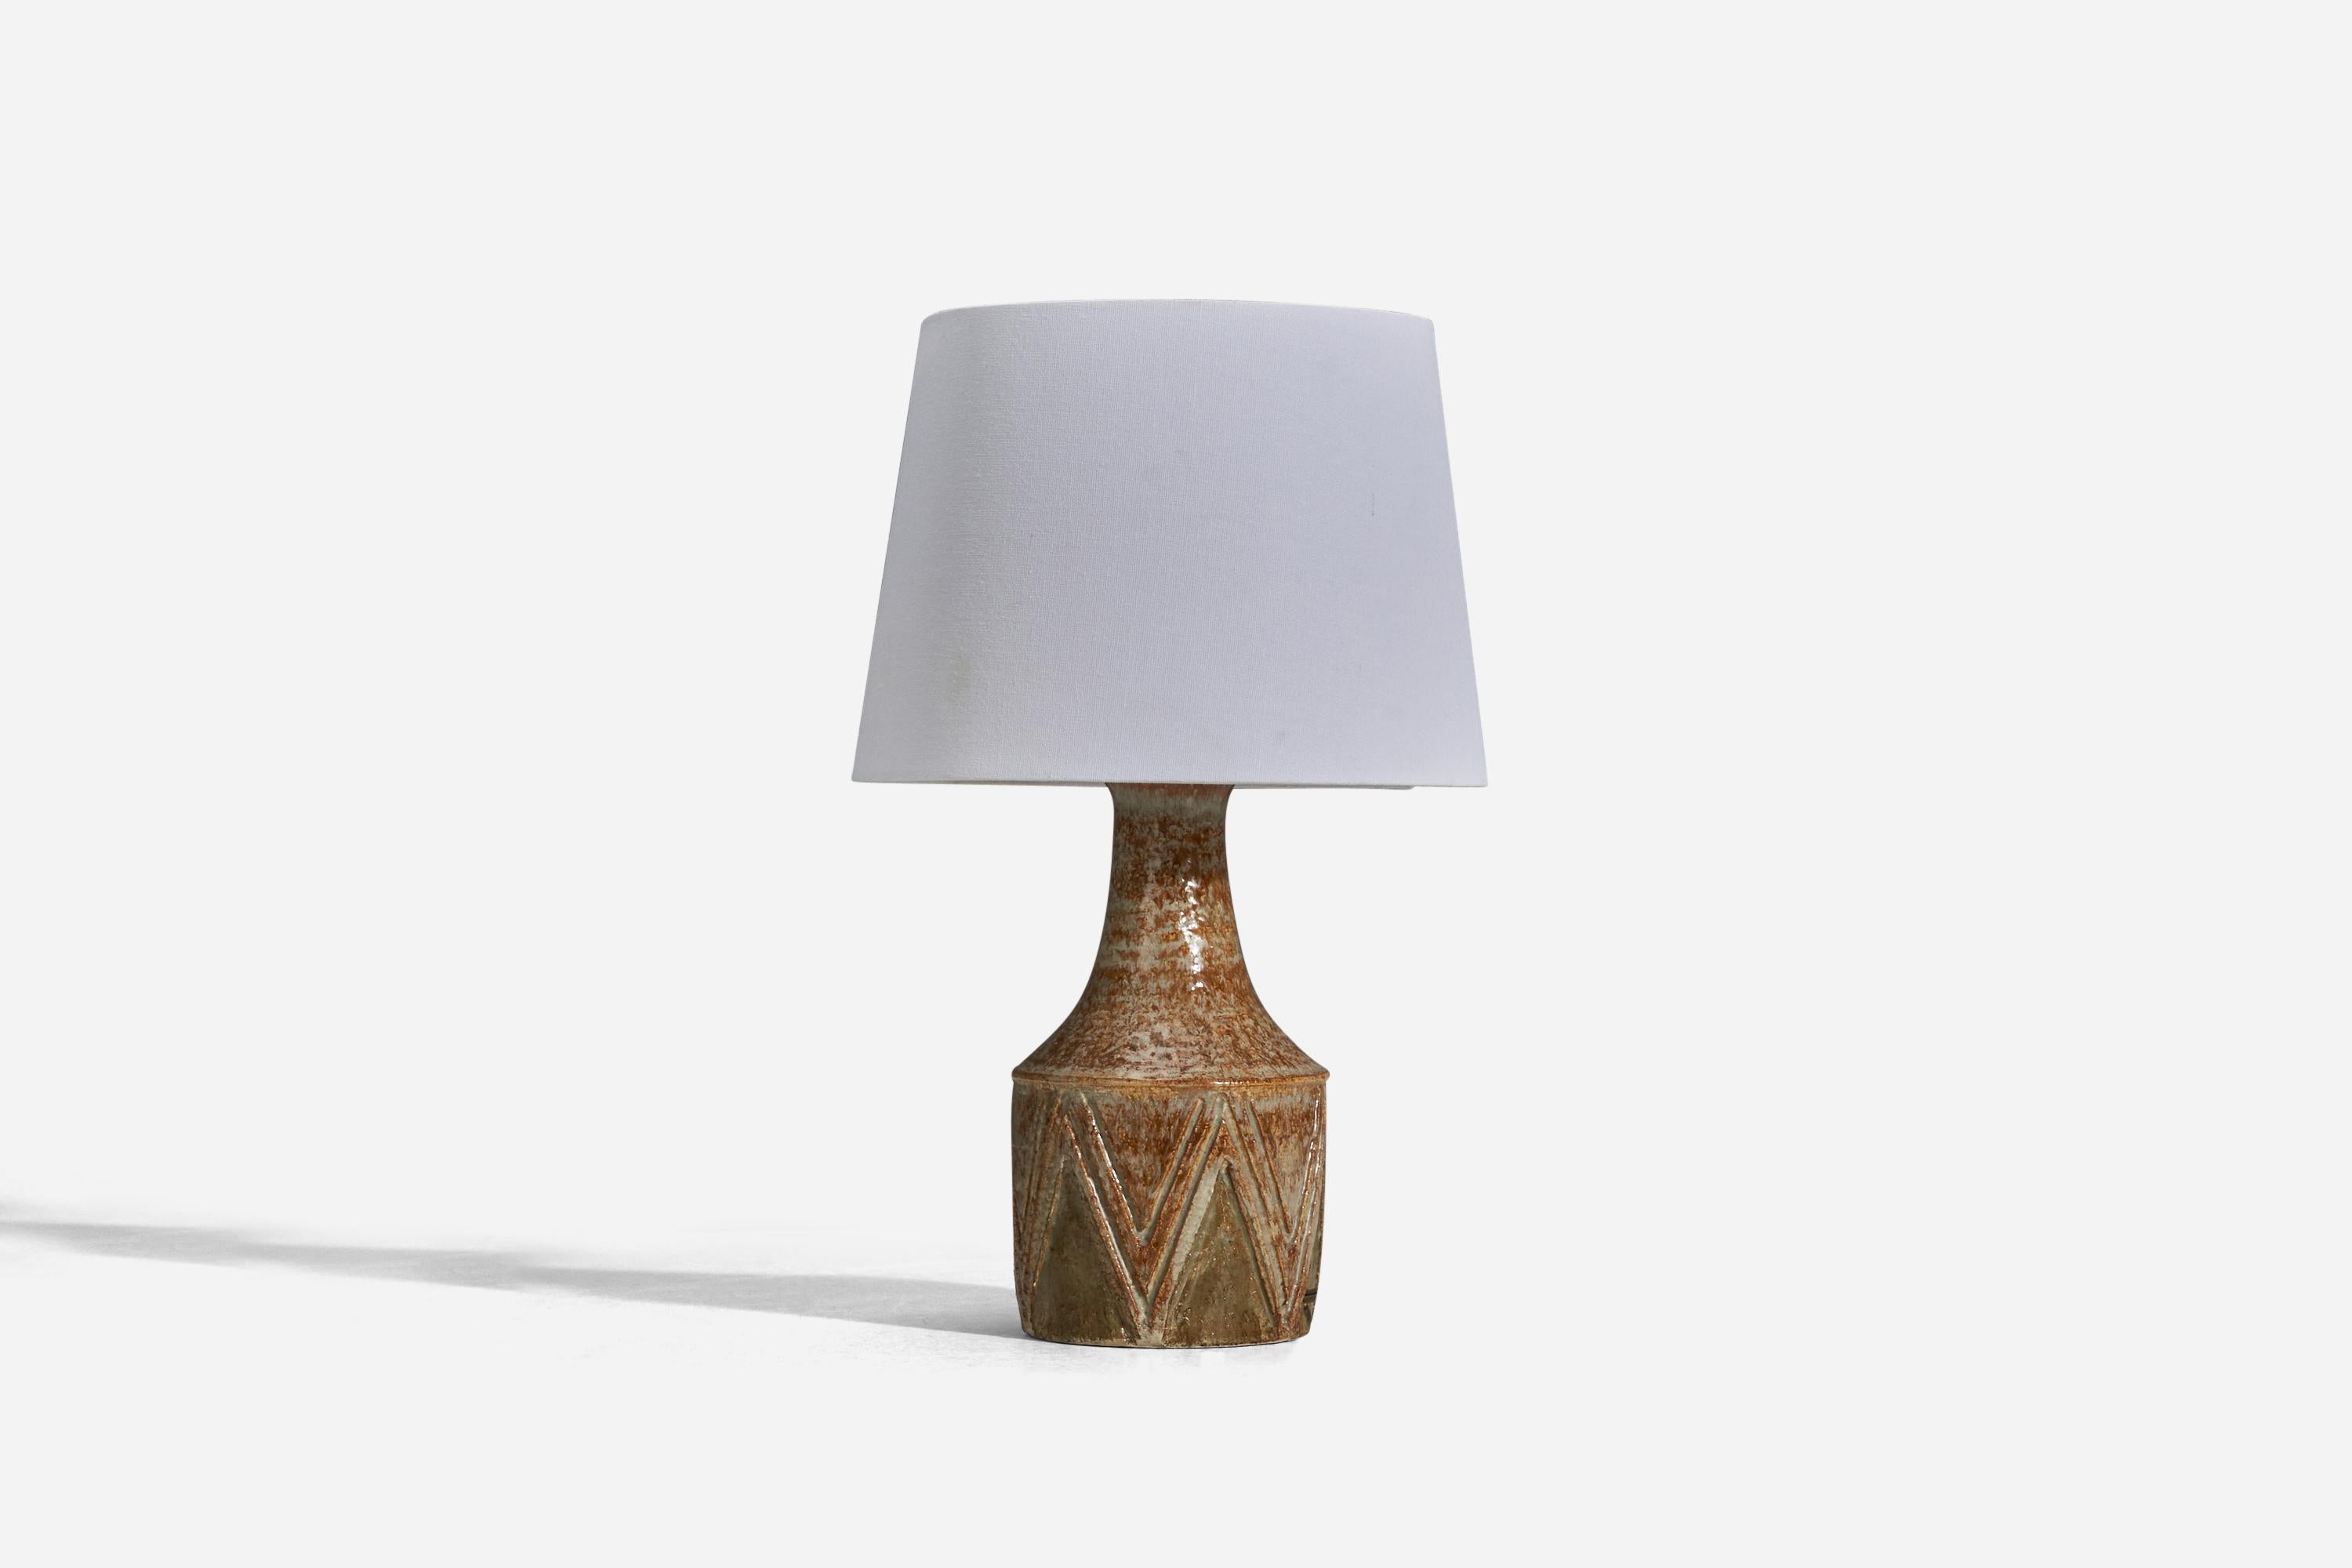 A brown glazed stoneware table lamp designed and produced by Chris Haslev Keramik, Denmark, 1960s. 

Sold without lampshade
Dimensions of lamp (inches) : 11.5 x 5.12 x 5.12 (height x width x depth)
Dimensions of lampshade (inches) : 8 x 10 x 7.5